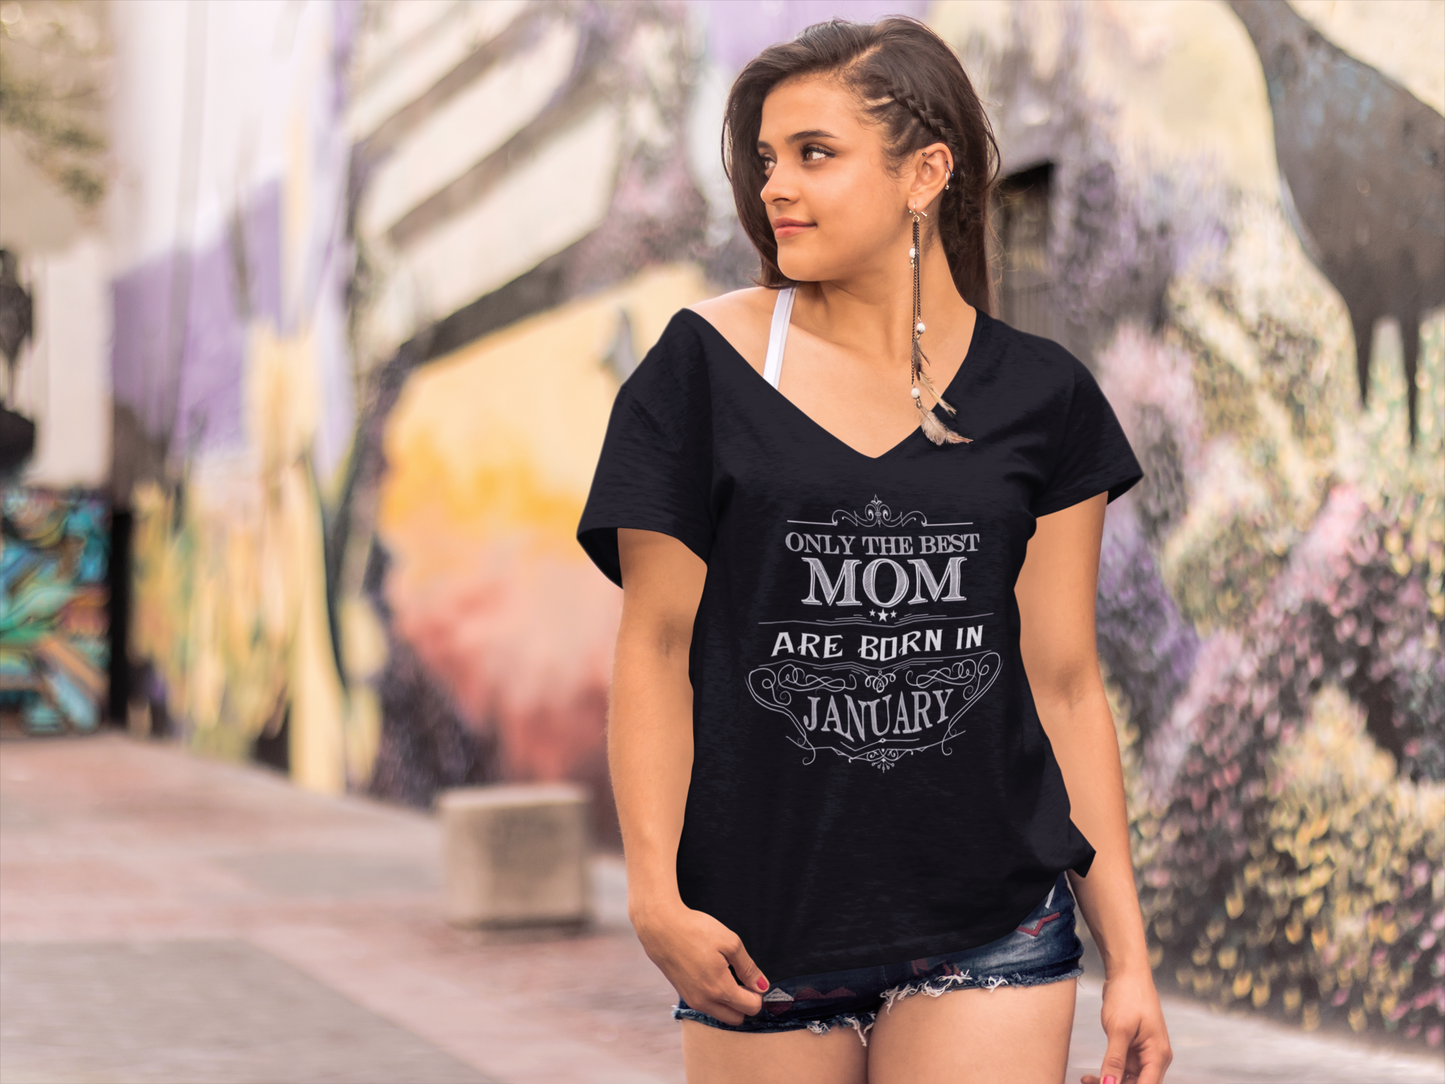 ULTRABASIC Women's T-Shirt Only the Best Mom are Born in January - Birthday Mother Tee Shirt